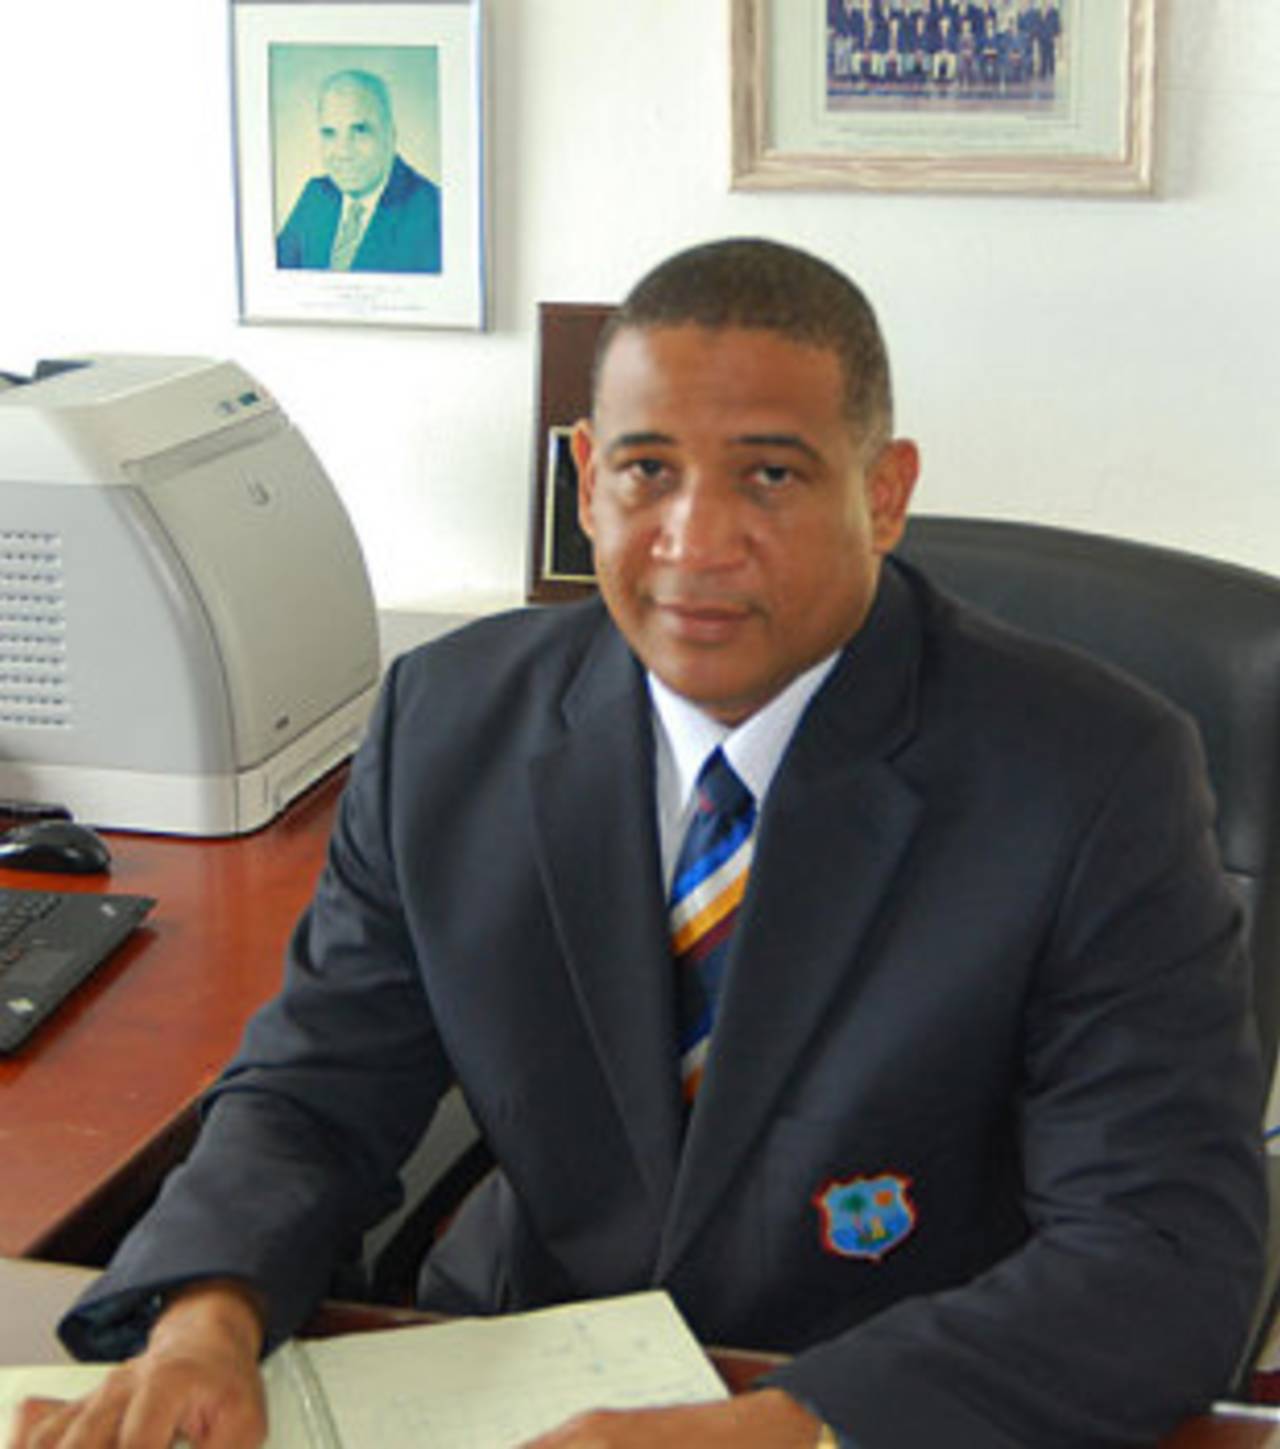 Ernest Hilaire, CEO of the WICB, has delivered a scathing indictment of West Indies cricket&nbsp;&nbsp;&bull;&nbsp;&nbsp;West Indies Cricket Board